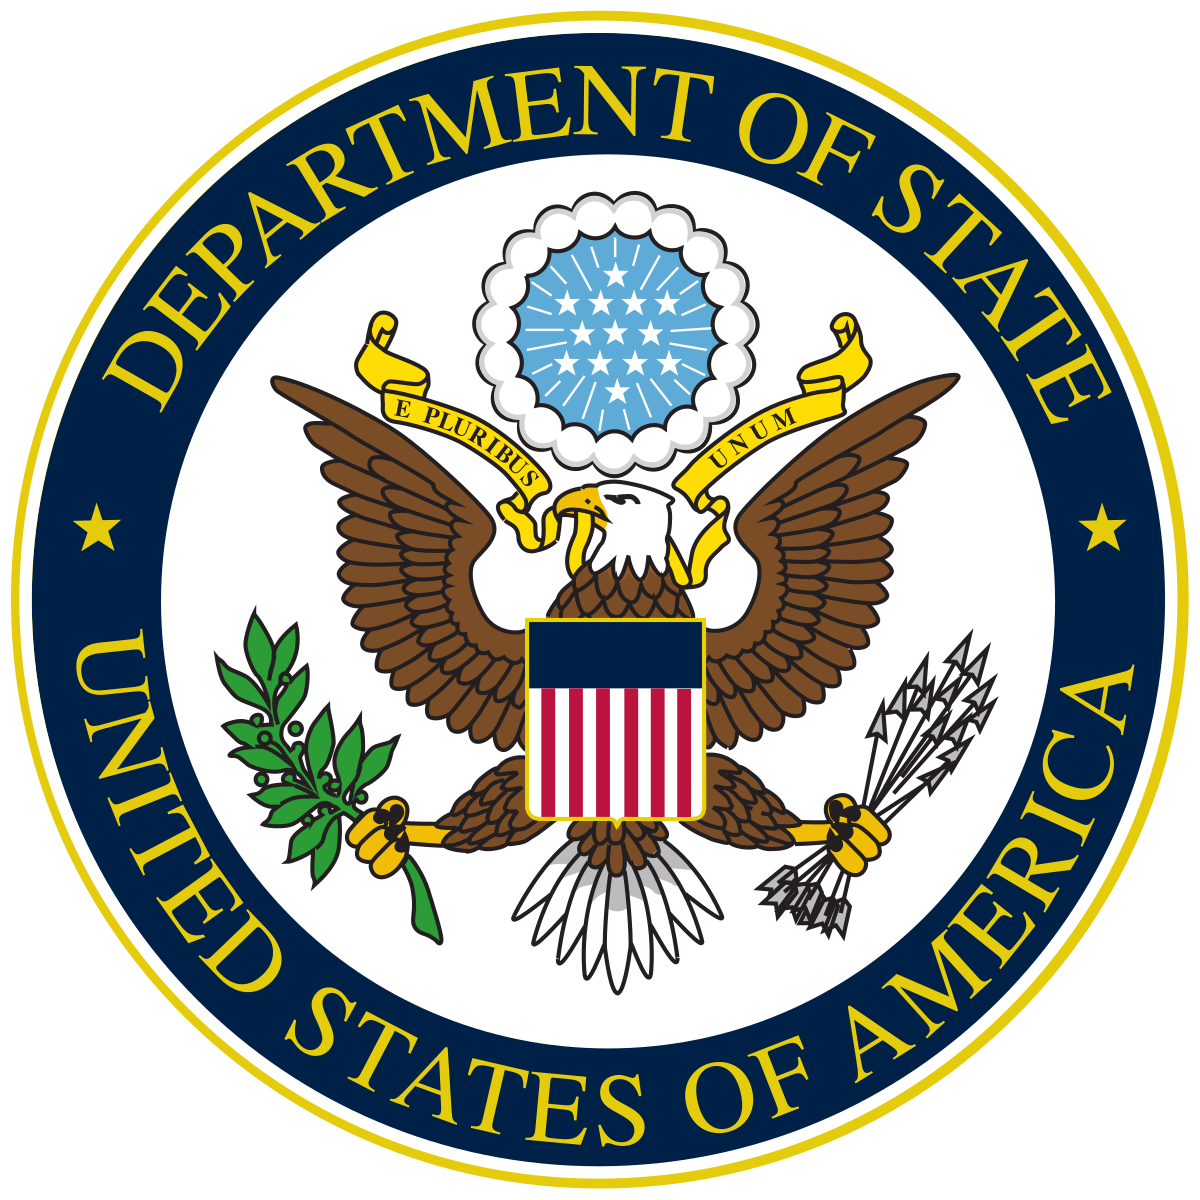 Why US Embassy syndicate sell visa interview dates to Nigerians for N600,000